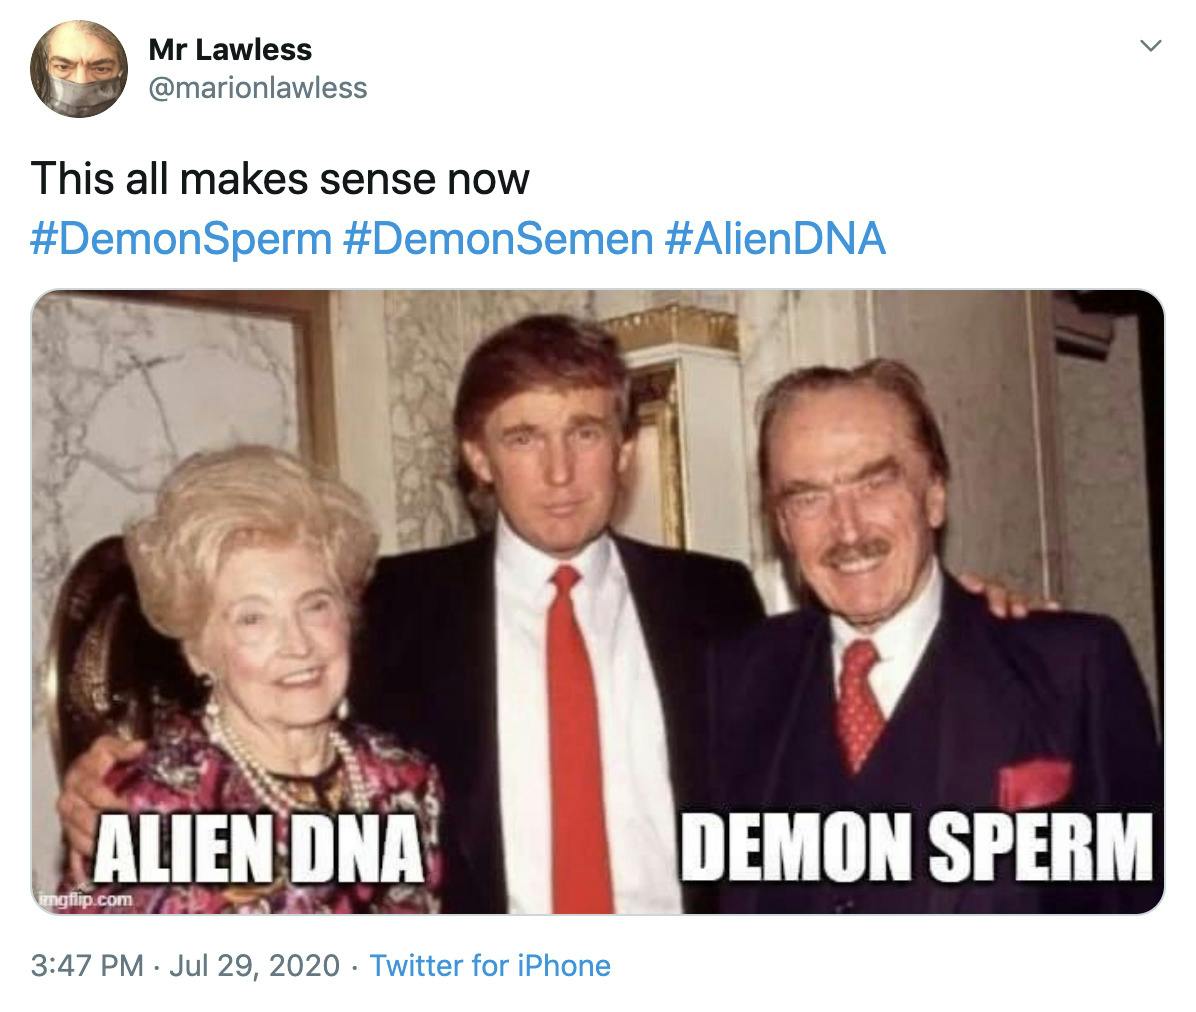 "This all makes sense now " image of Trump standing between his mother on the left and father on the right. Alien DNA is written under his mother and demon semen under his father